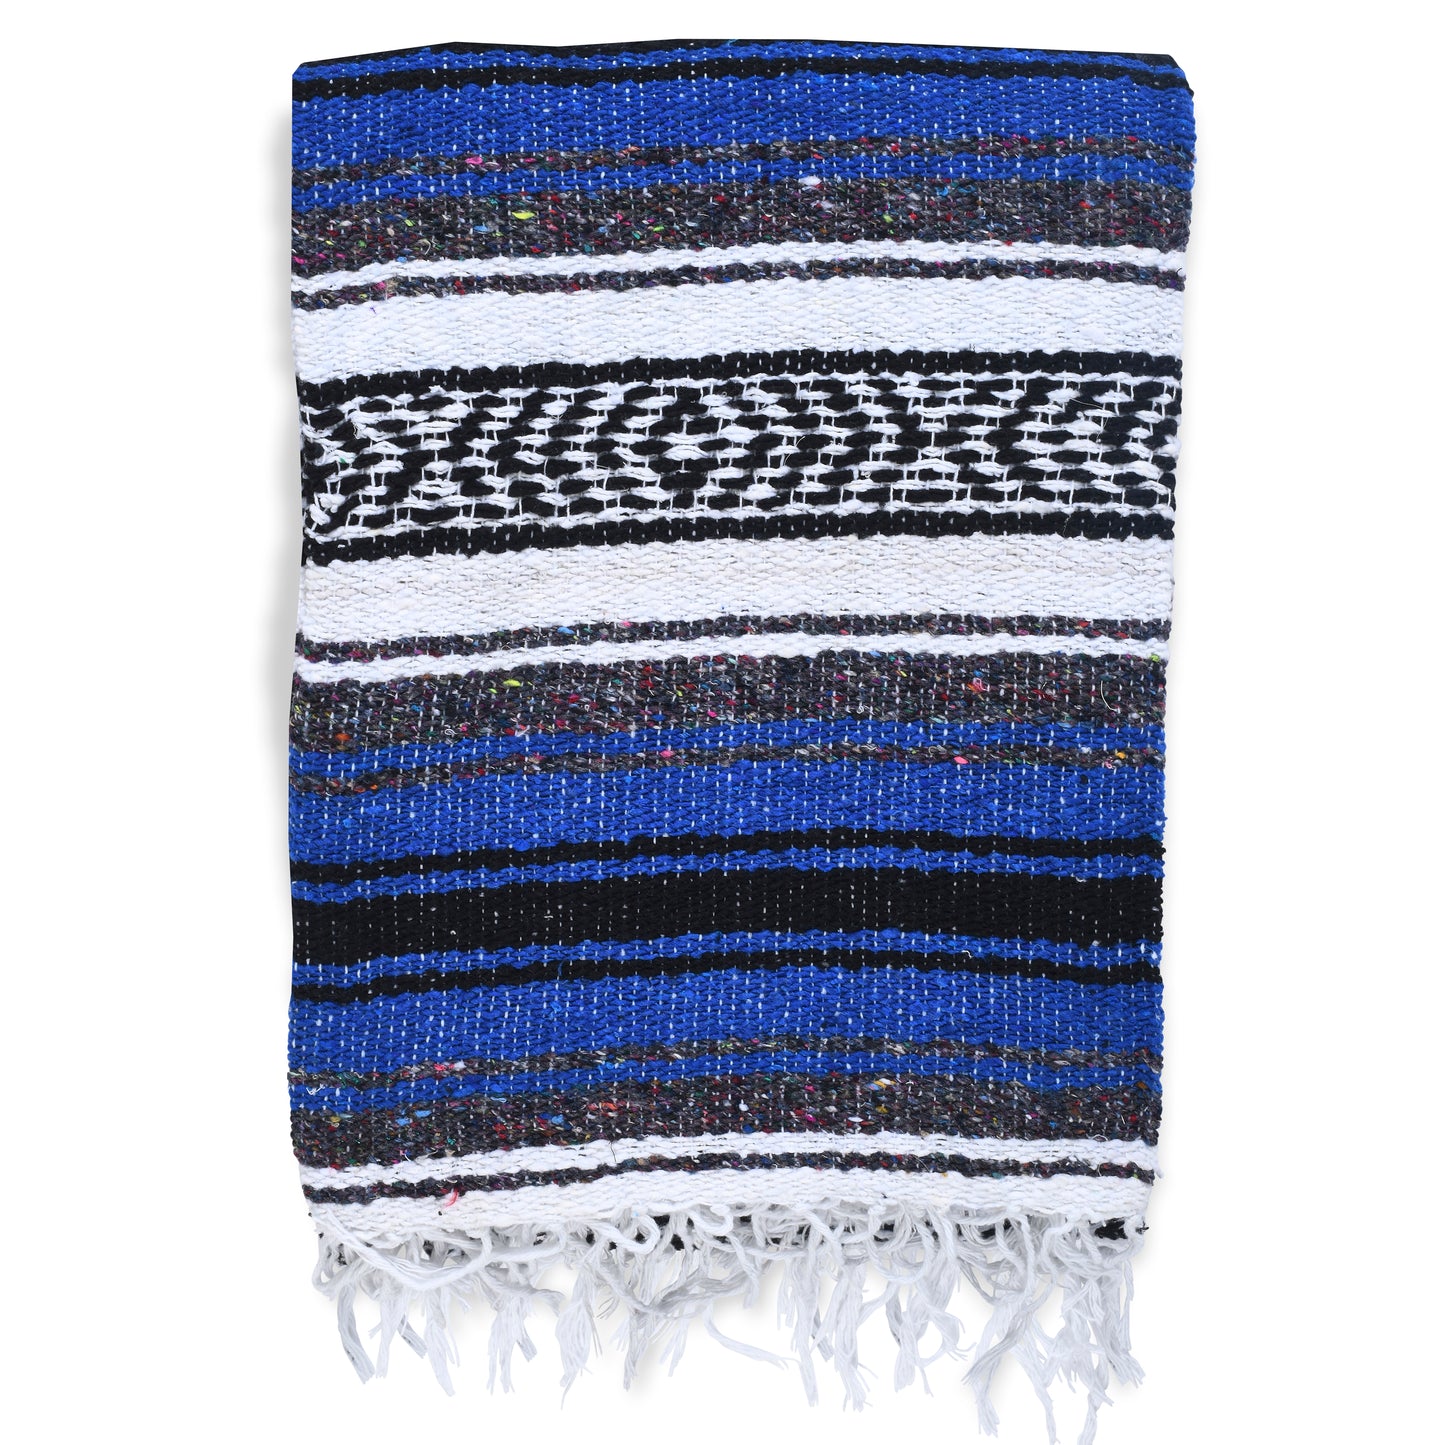 Mexican Blanket, Deep Blue - for Yoga, Camping, Picnics, Travel, Beach - WHOLESALE